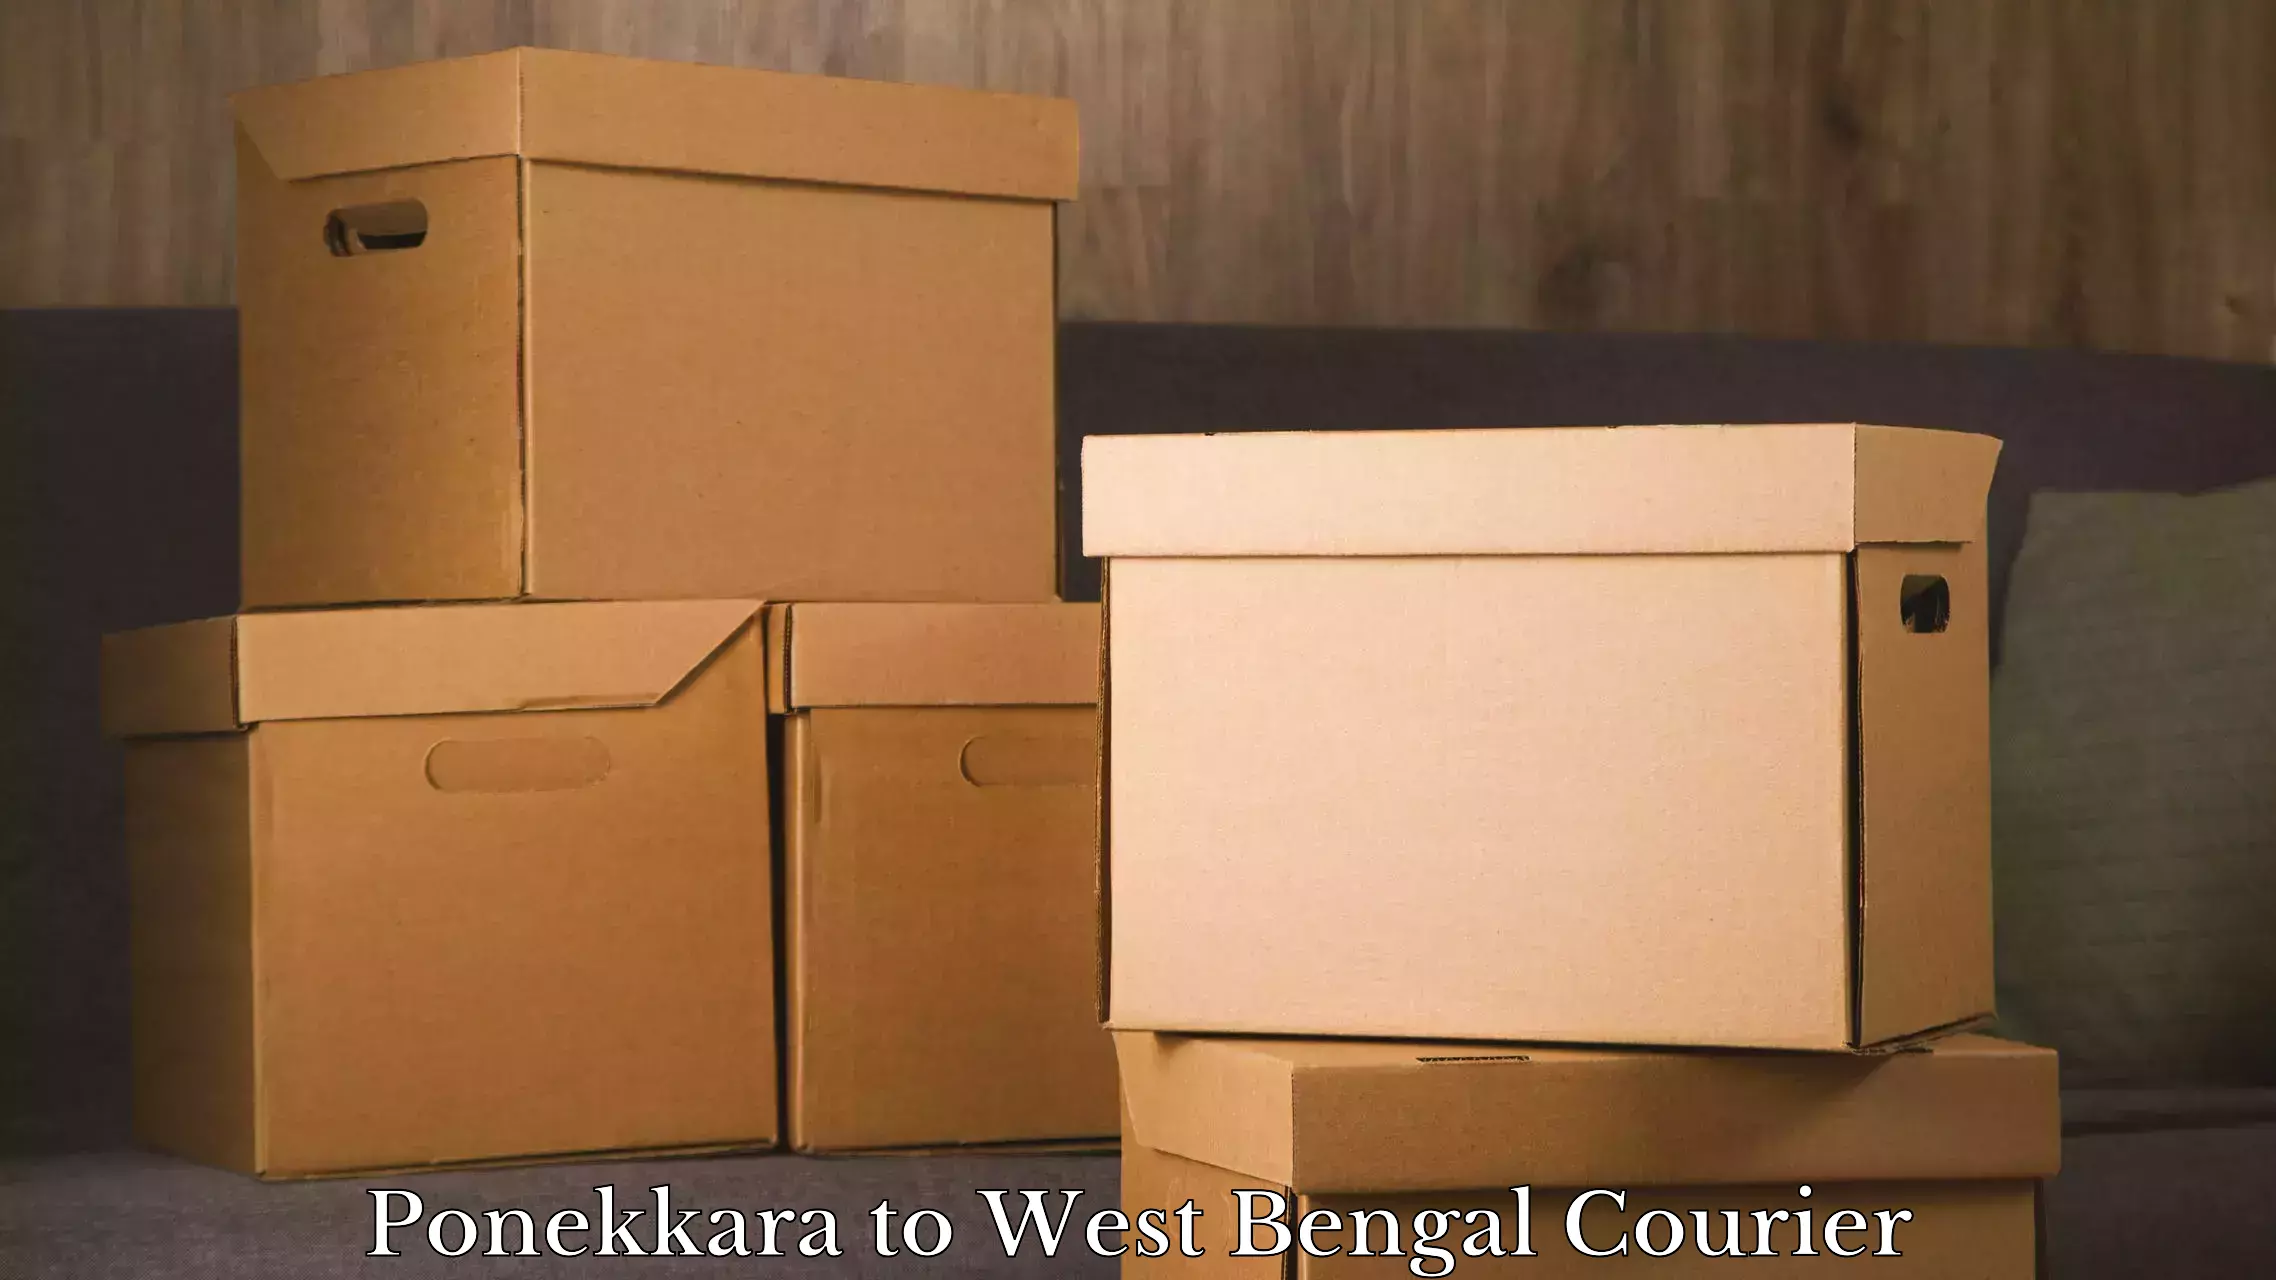 Automated luggage transport Ponekkara to West Bengal